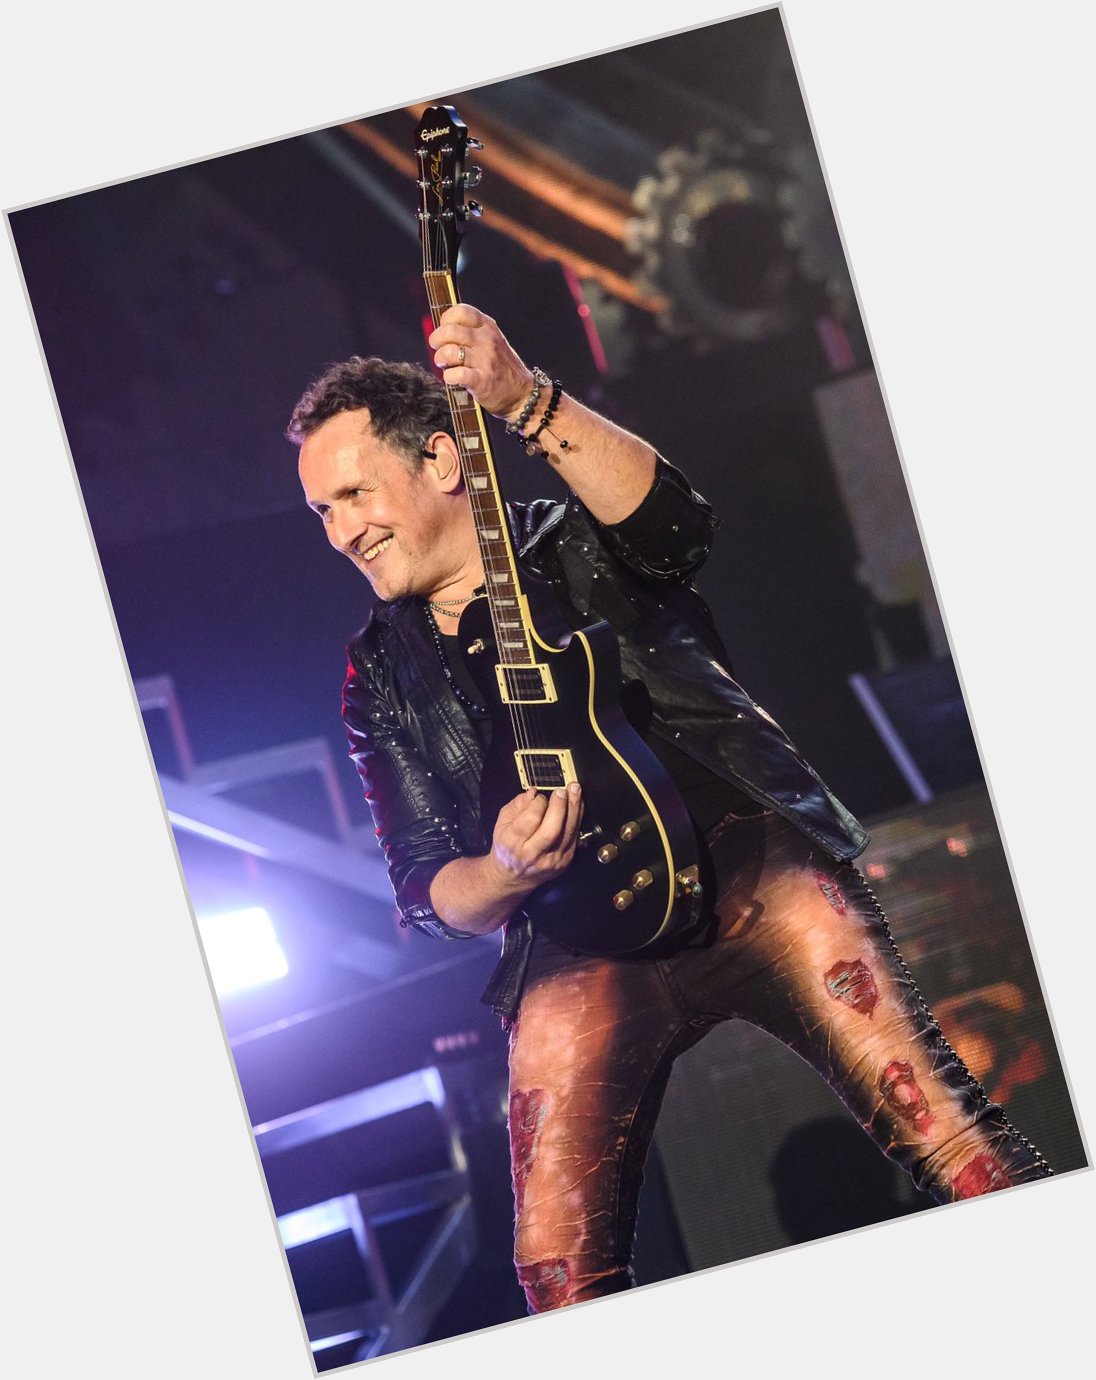  Wishing Vivian Campbell a VERY happy birthday! Everyone send him some love today.  